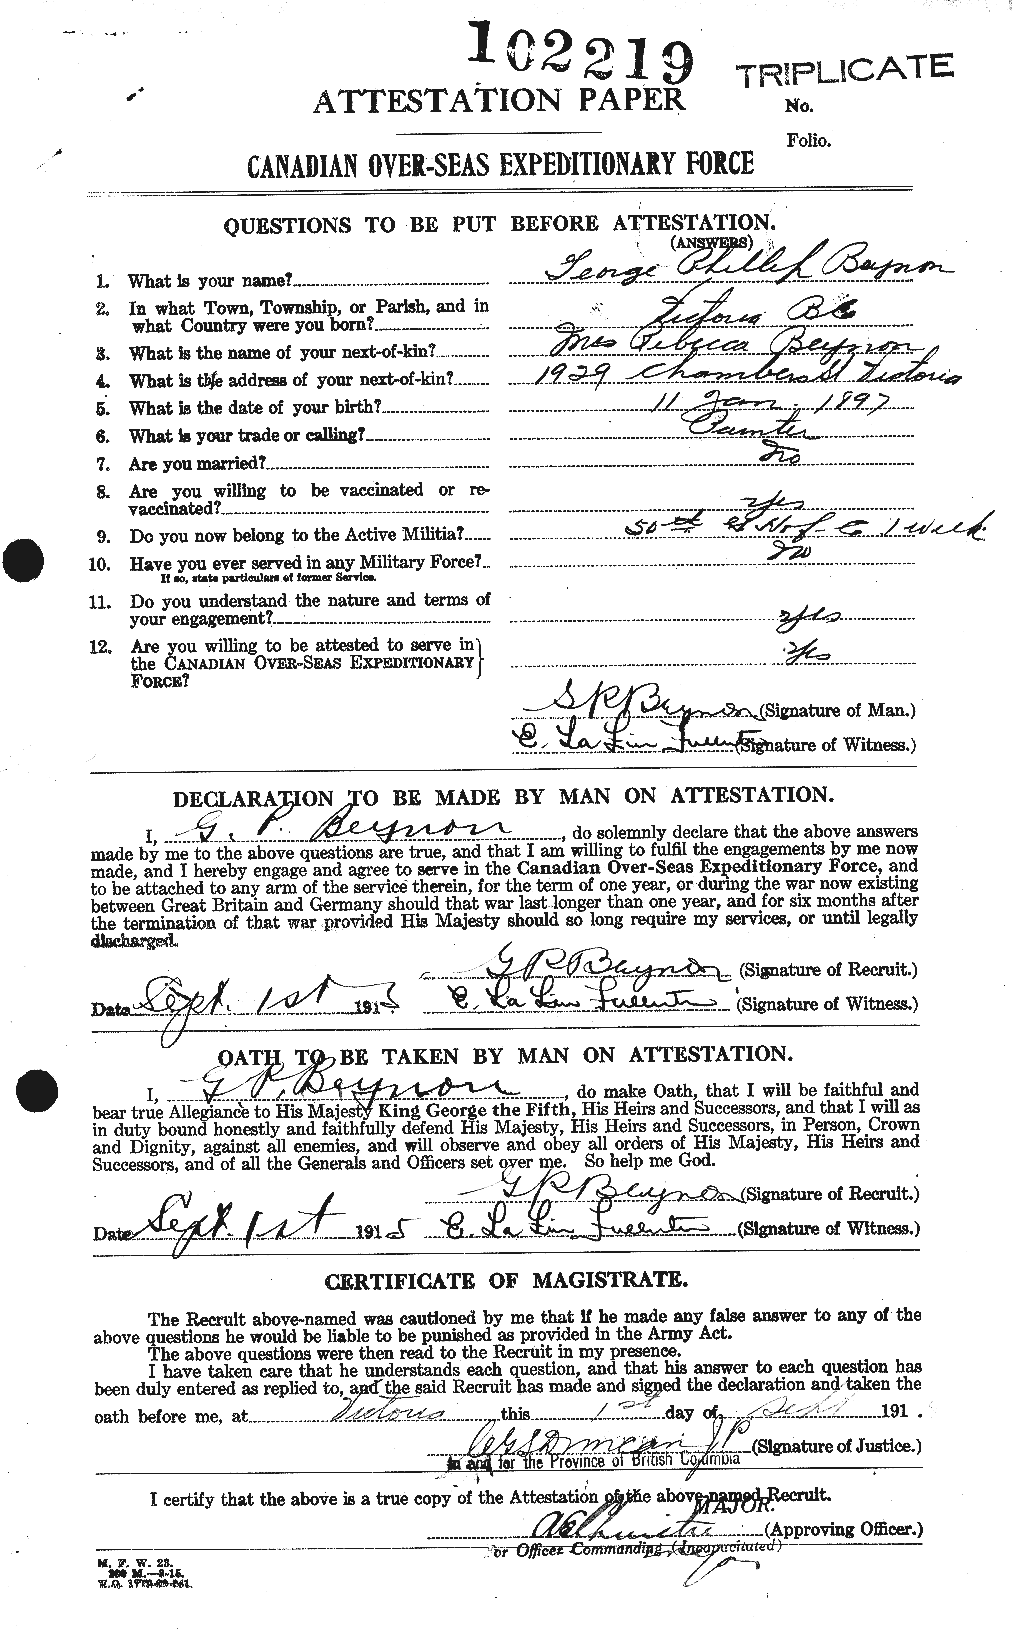 Personnel Records of the First World War - CEF 237509a